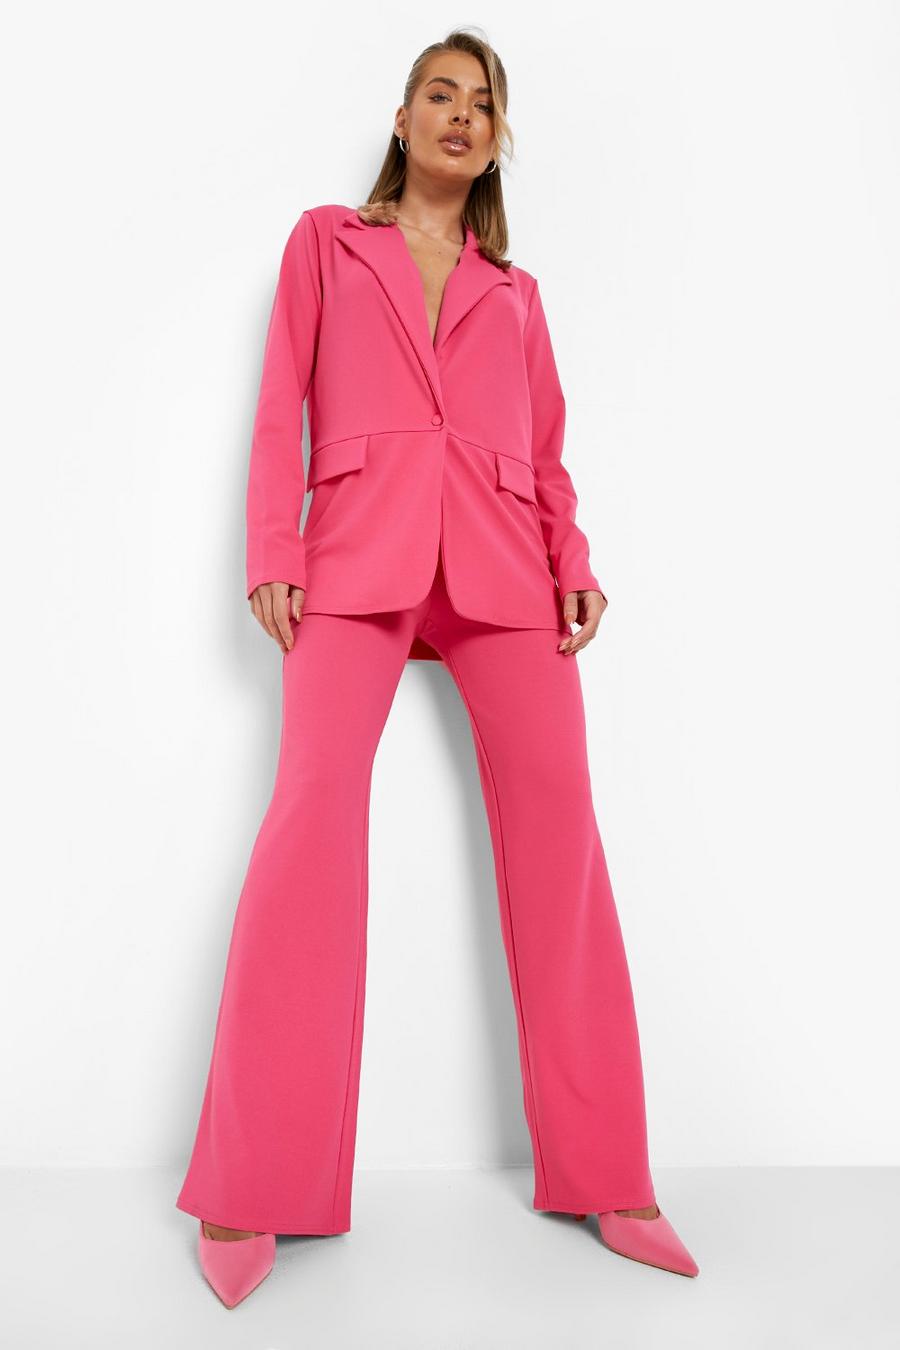 Candy pink rosa Relaxed Fit Blazer & Wide Leg Trouser Suit